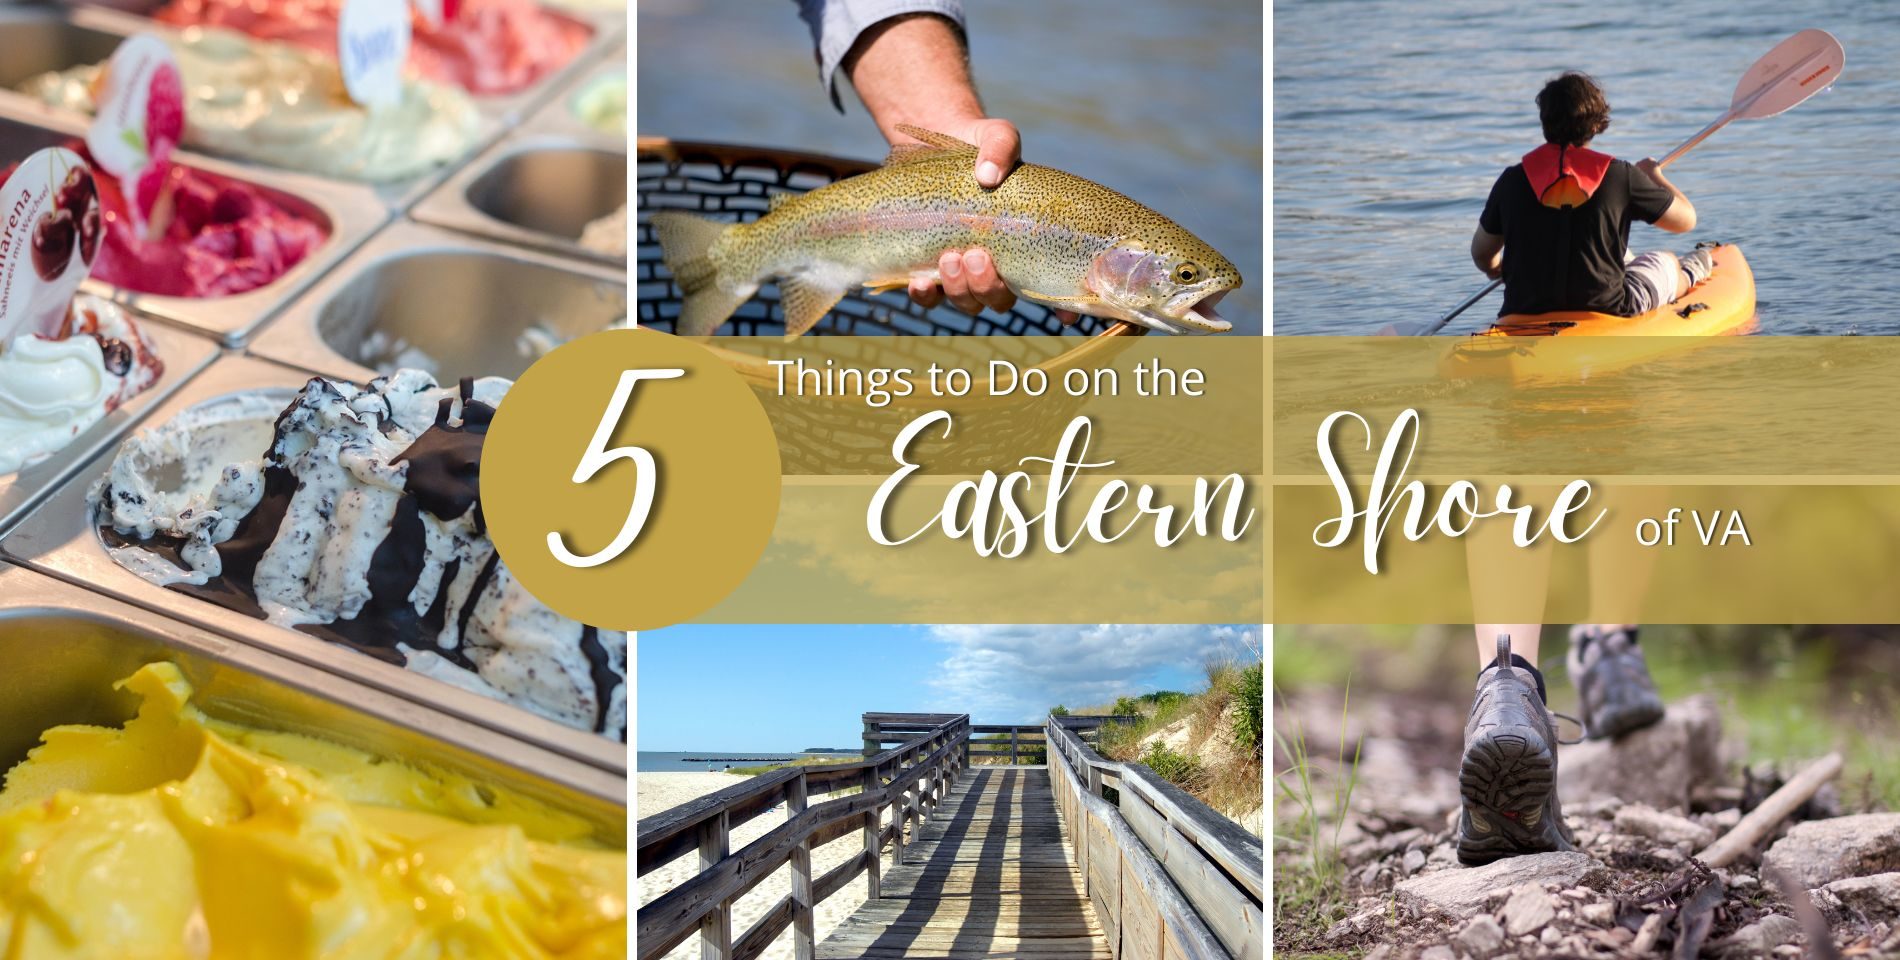 Collage of 5 images: containers of ice cream, a man an holding trout, a person kayaking, the Cape Charles beach, a person hiking with text, “5 things to Do on the Eastern Shore of VA”